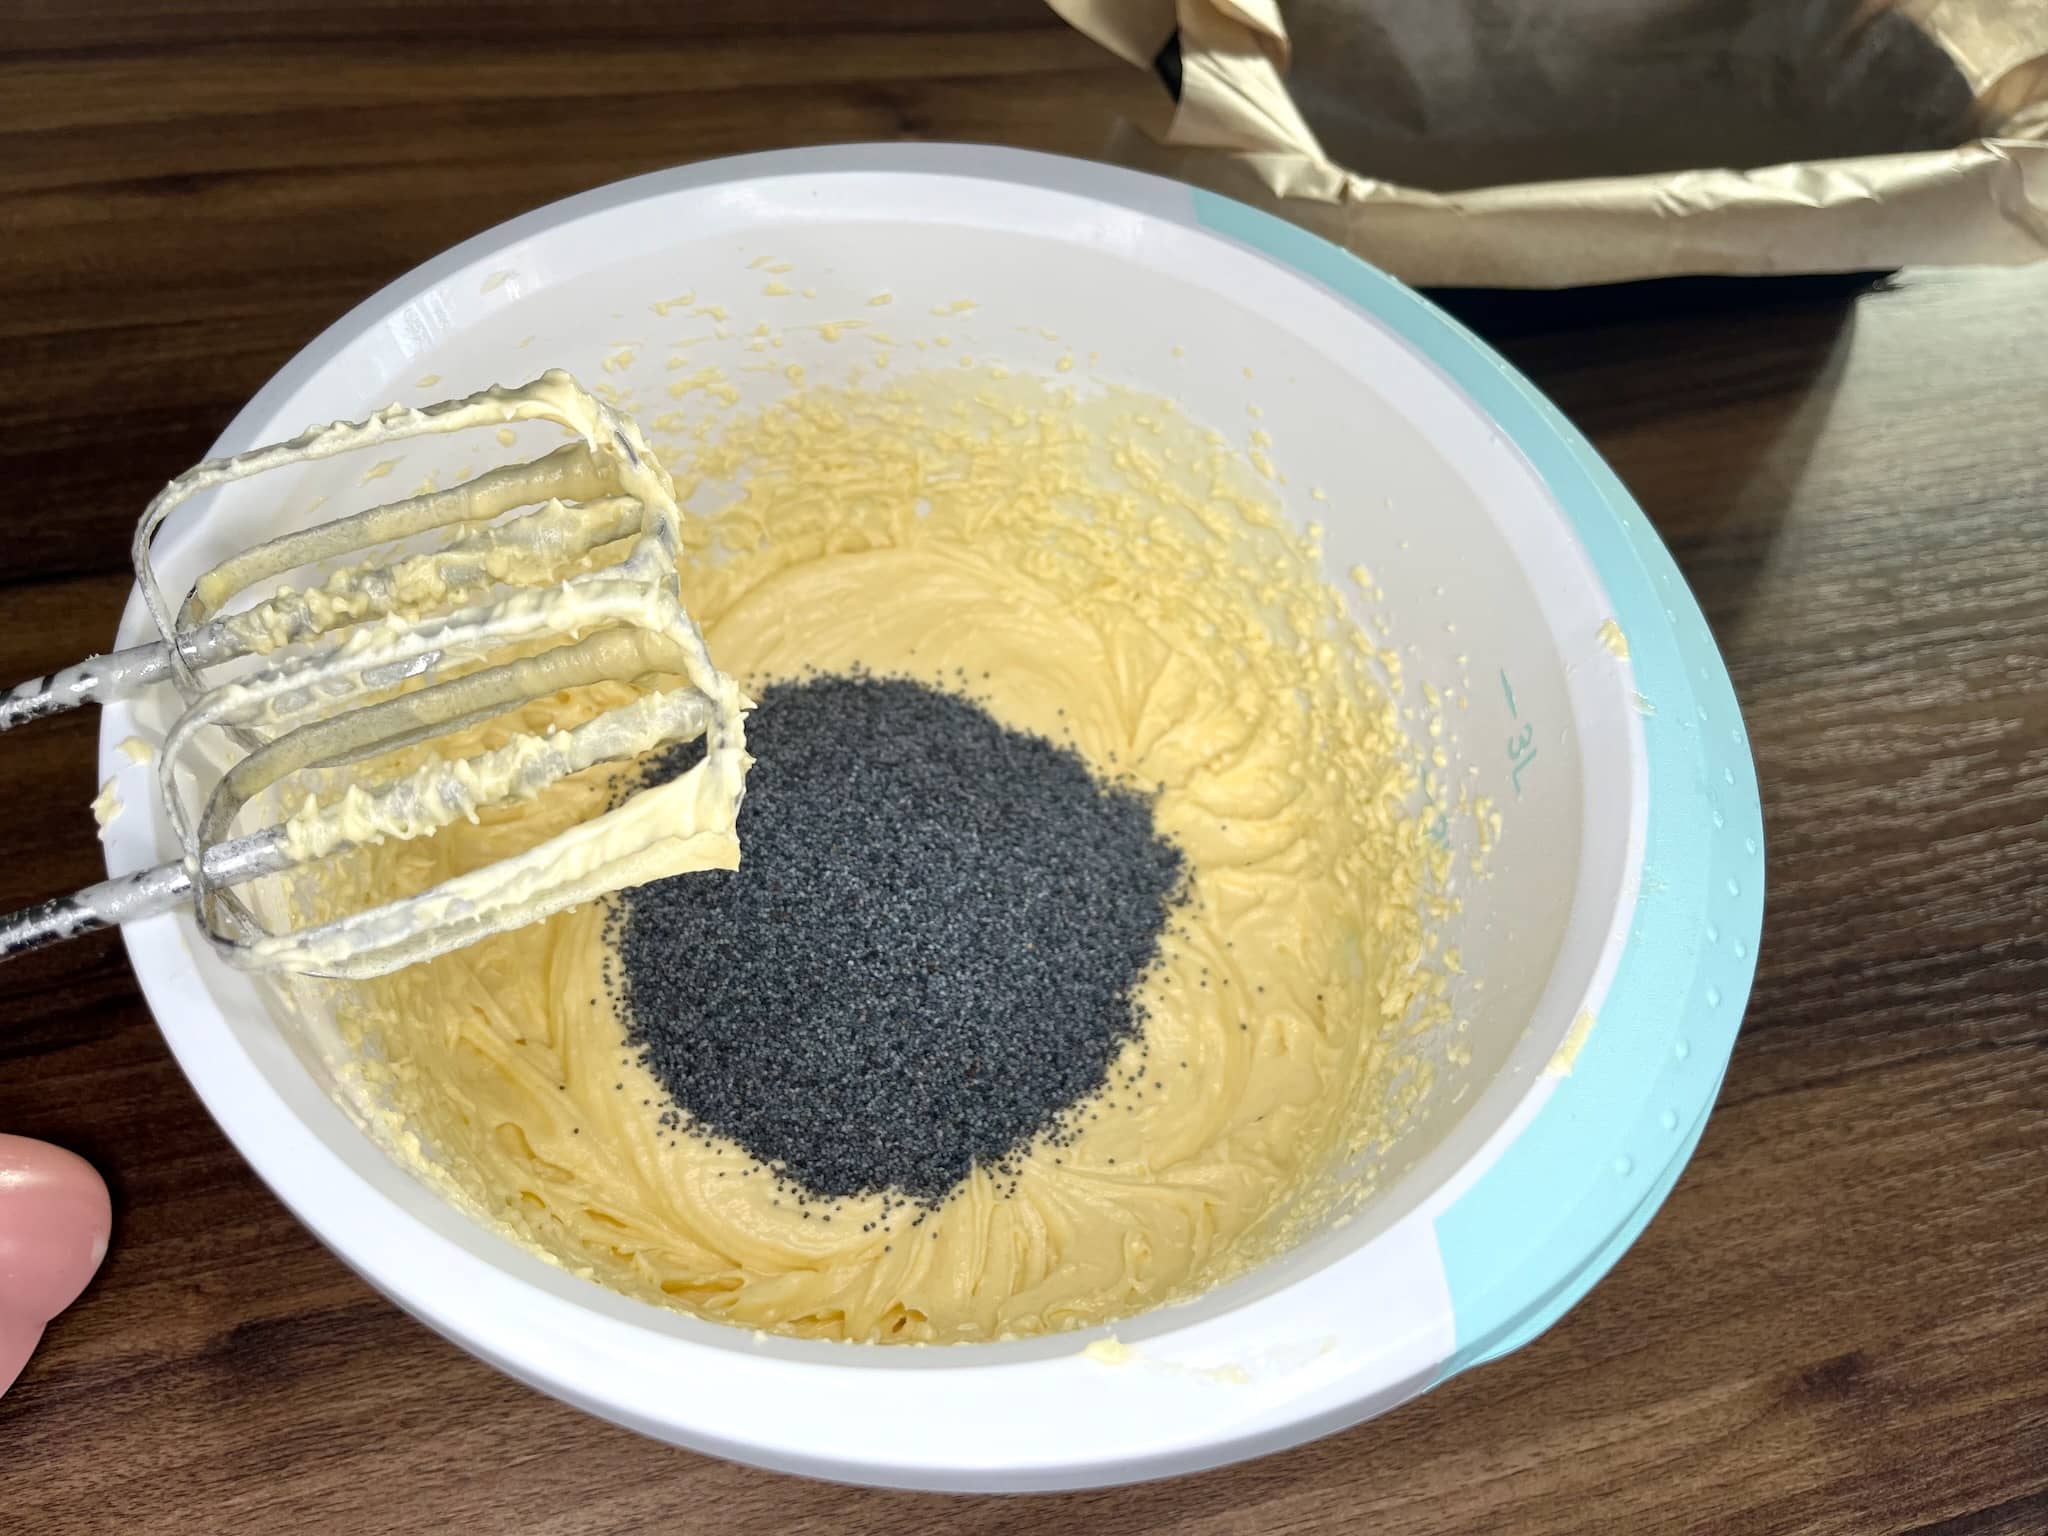 Beat eggs and sugar together in a bowl, then add poppy seeds